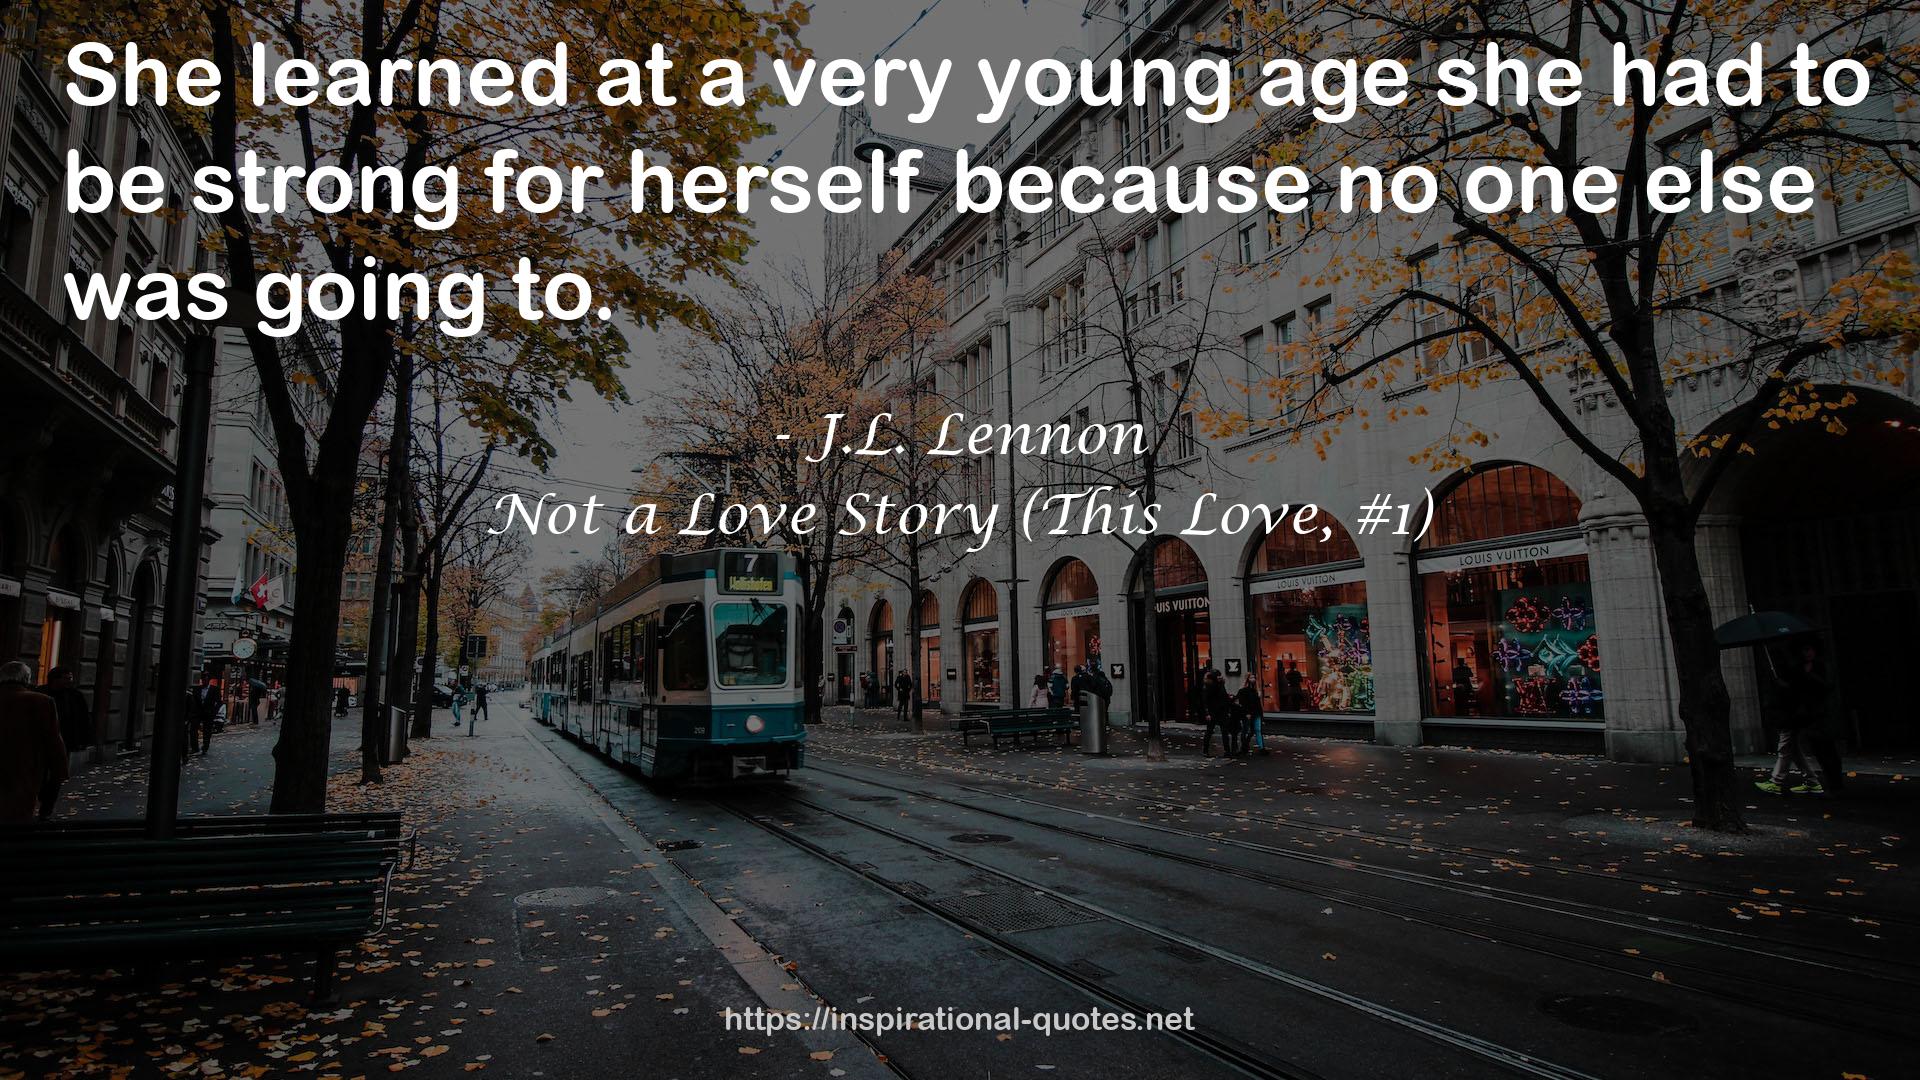 Not a Love Story (This Love, #1) QUOTES